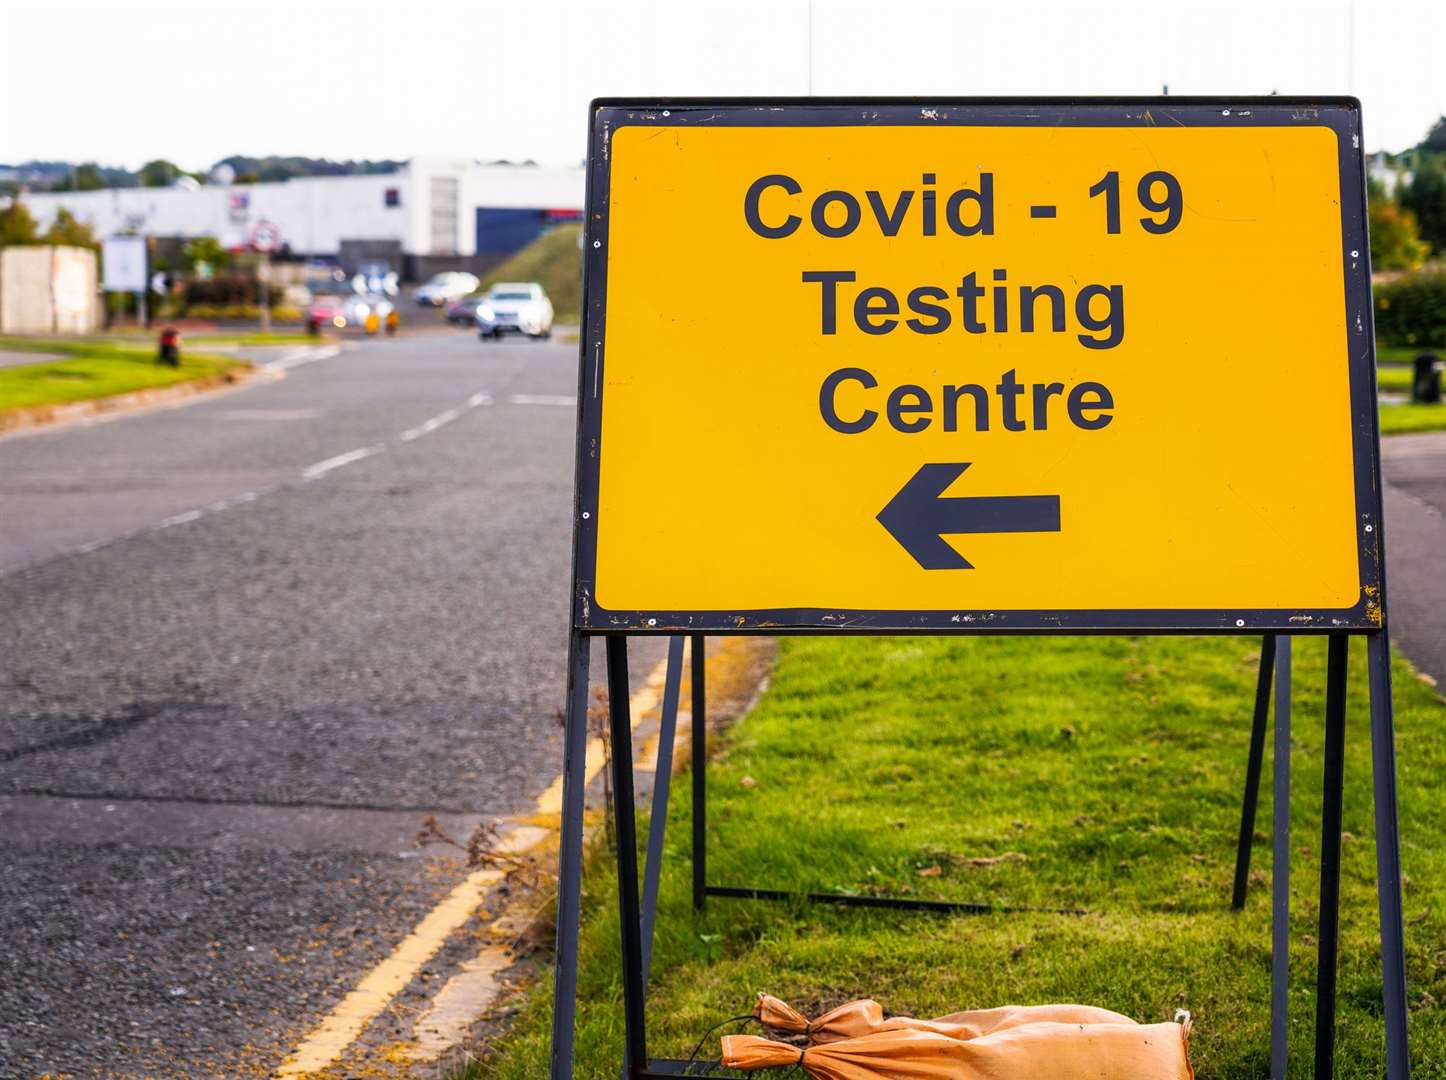 The rate of Covid-19 cases in the county remains below the national average. Picture: iStock